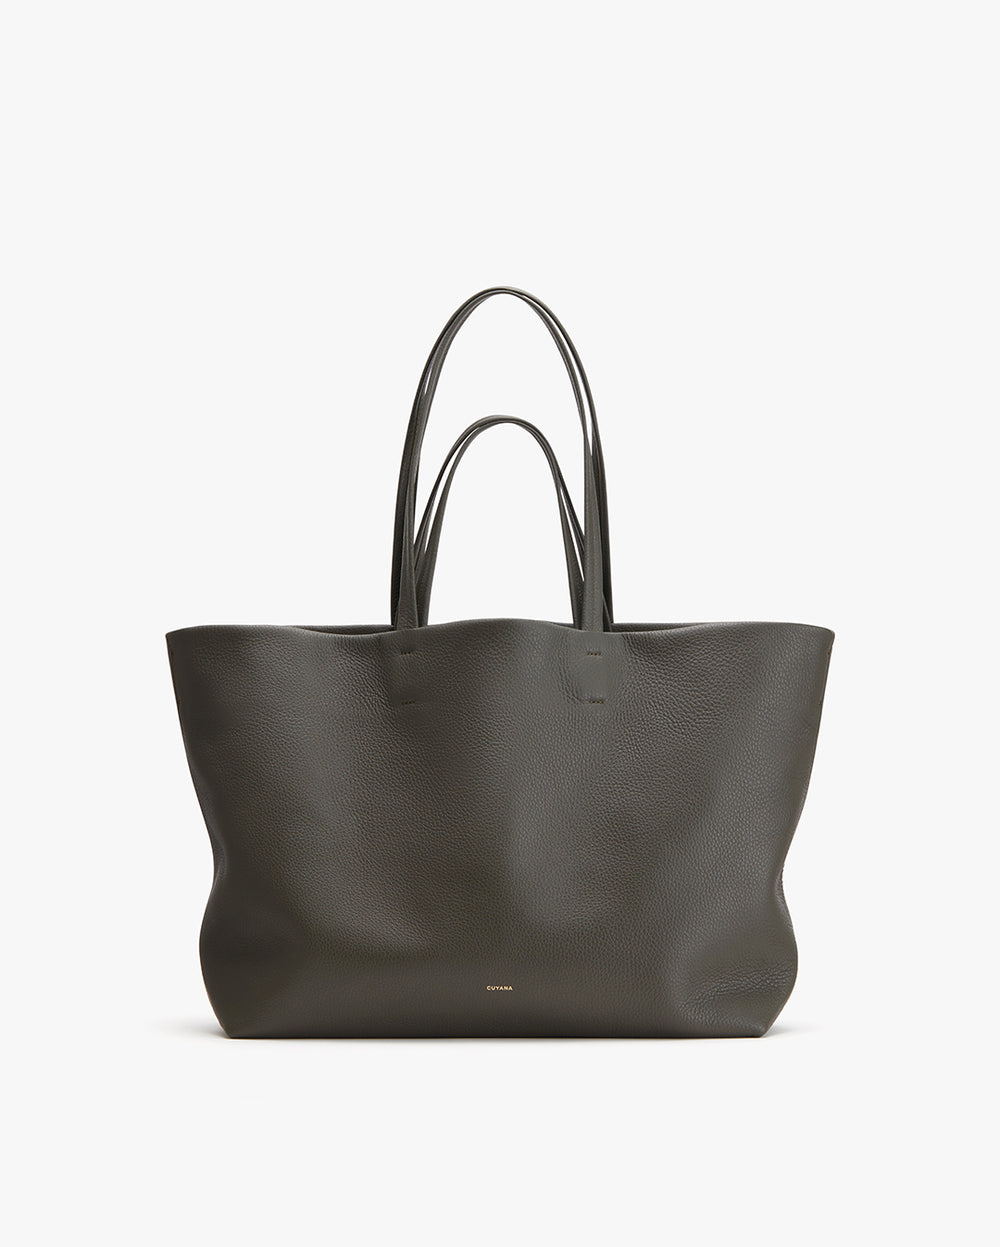 Large tote bag with two handles and a logo near the bottom.